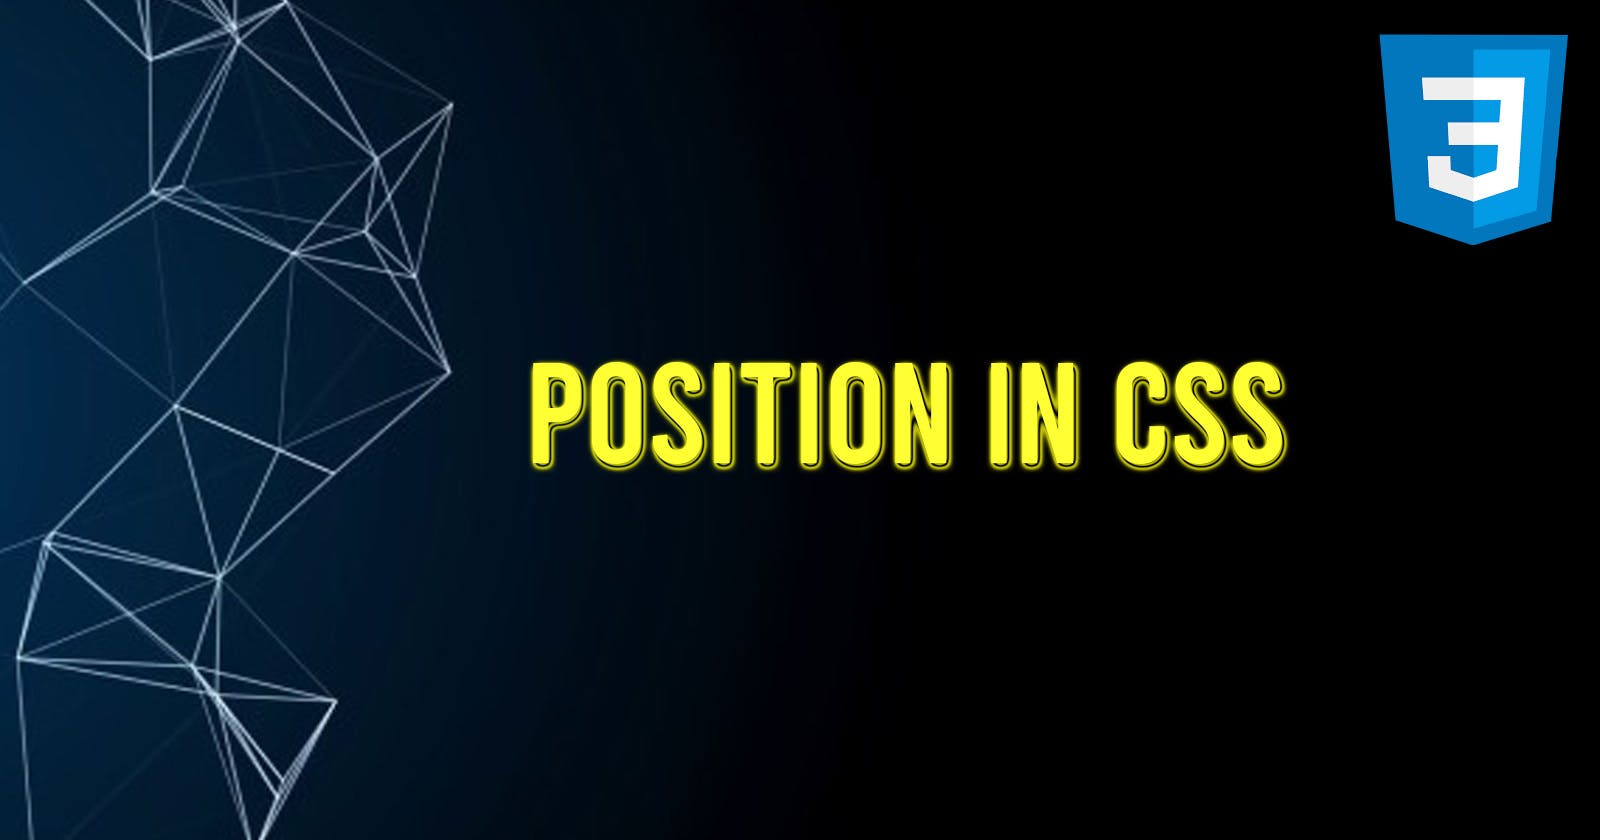 Position in CSS